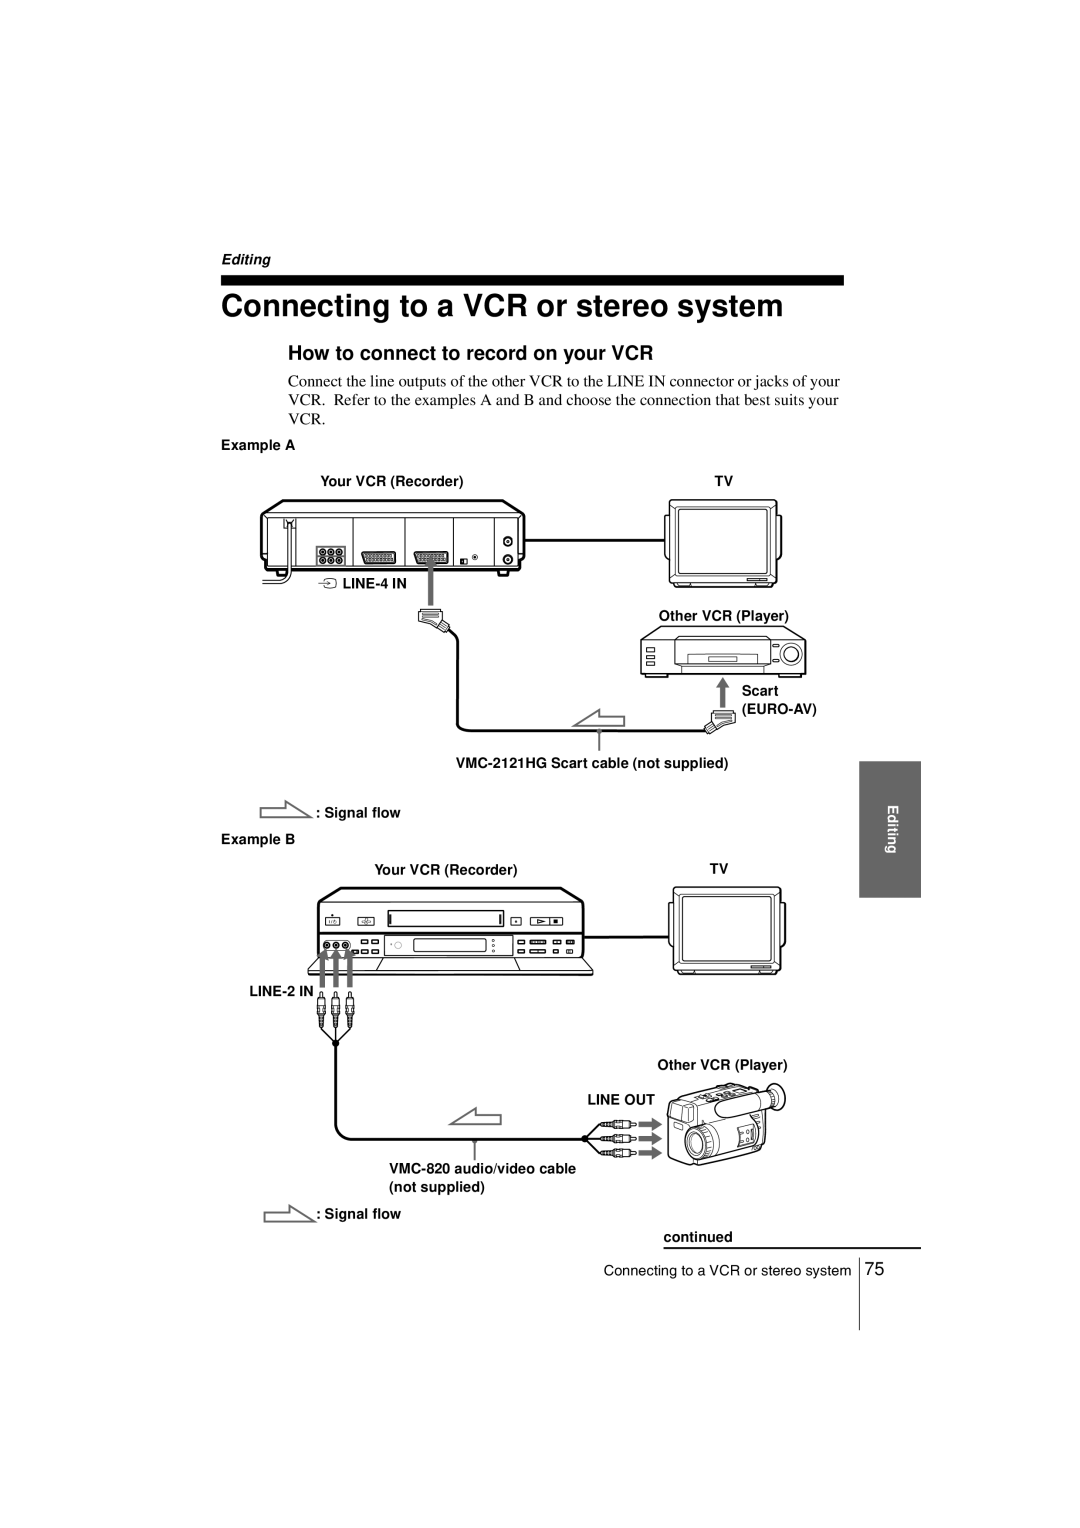 Sony SLV-SF990G manual Connecting to a VCR or stereo system, How to connect to record on your VCR, Editing 